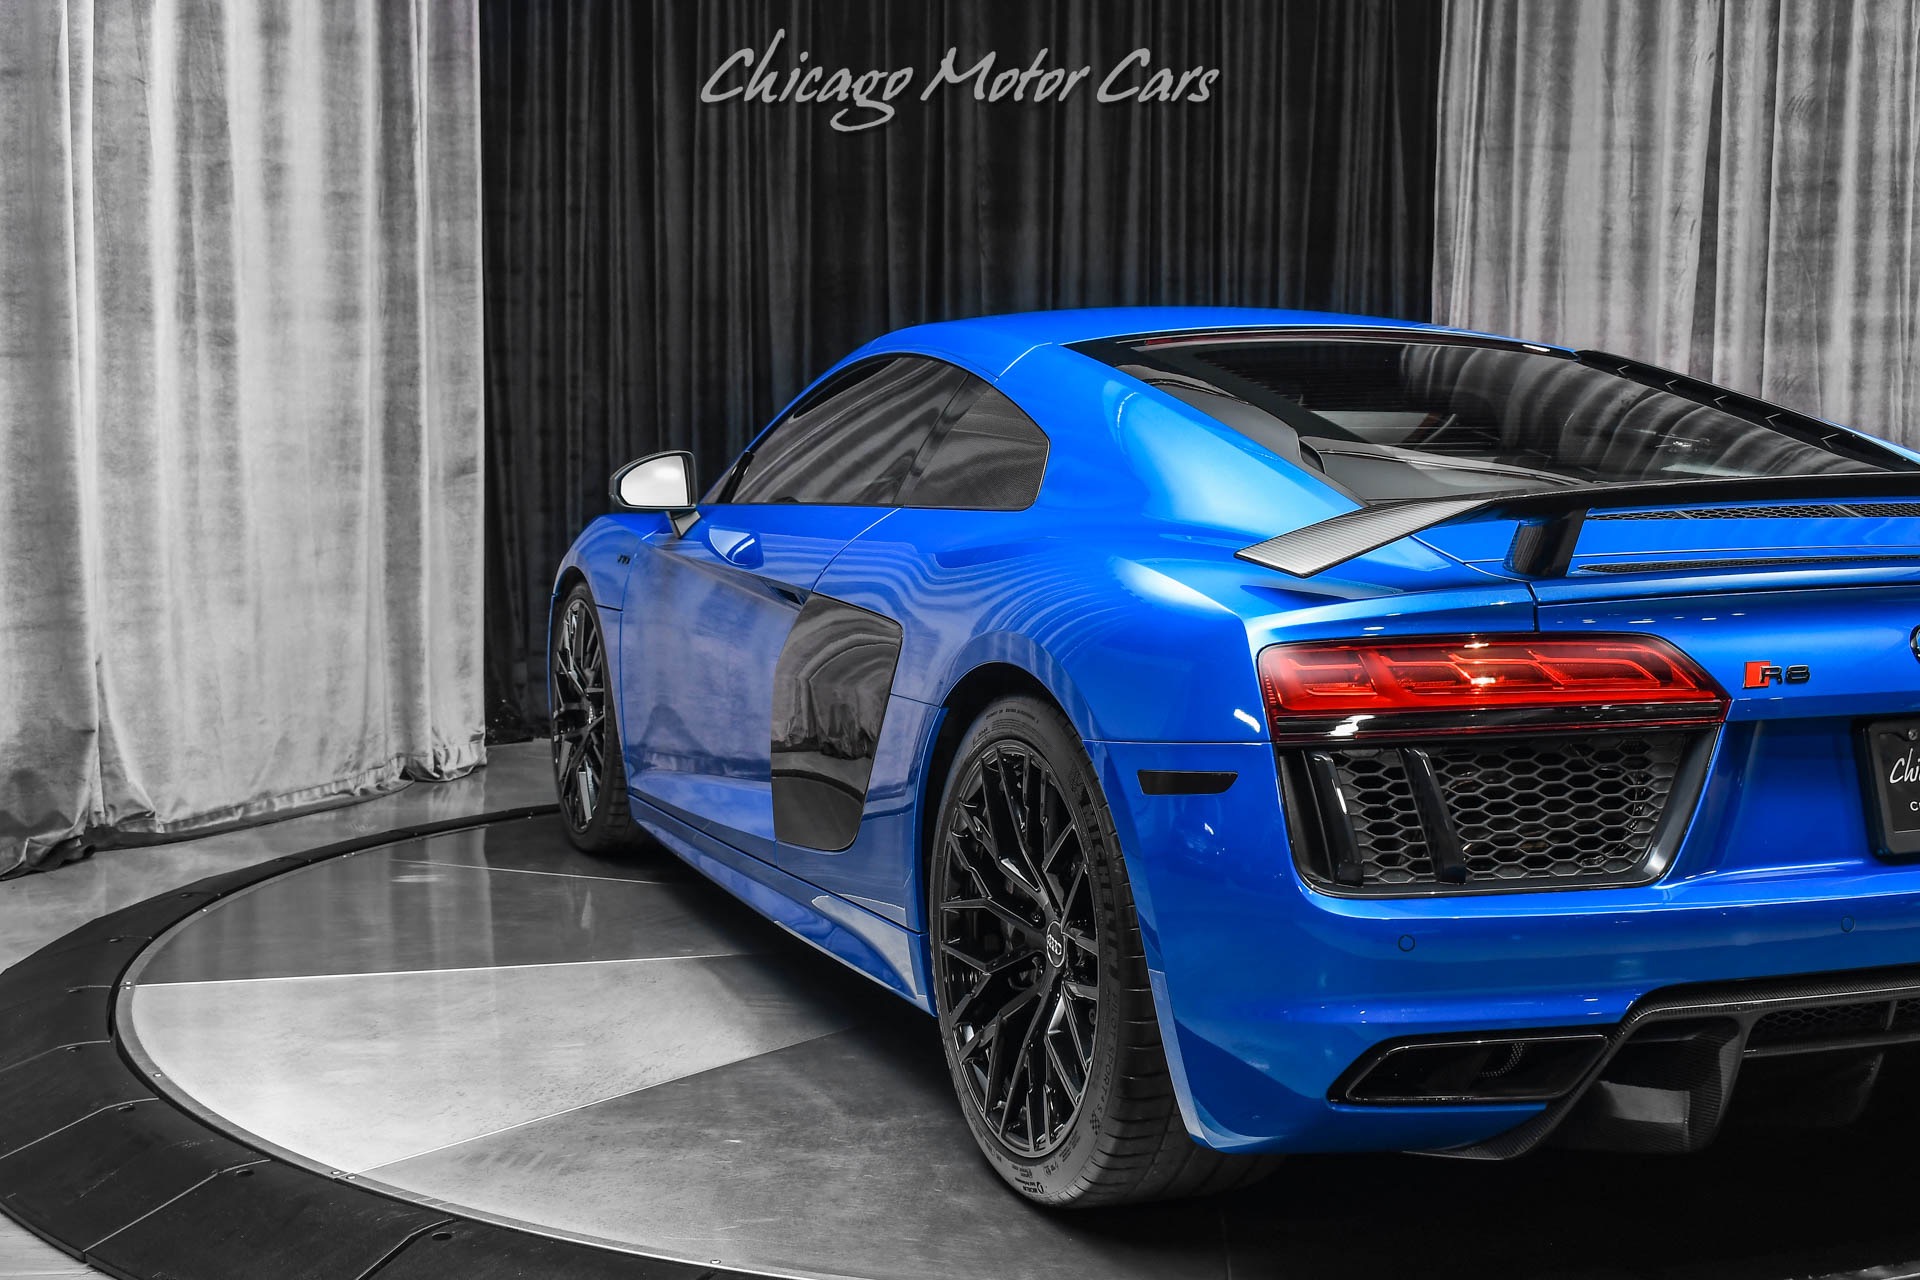 Used-2017-Audi-R8-52-quattro-V10-Plus-Coupe-ESS-Supercharged-FABSPEED-Exhaust-800-HP